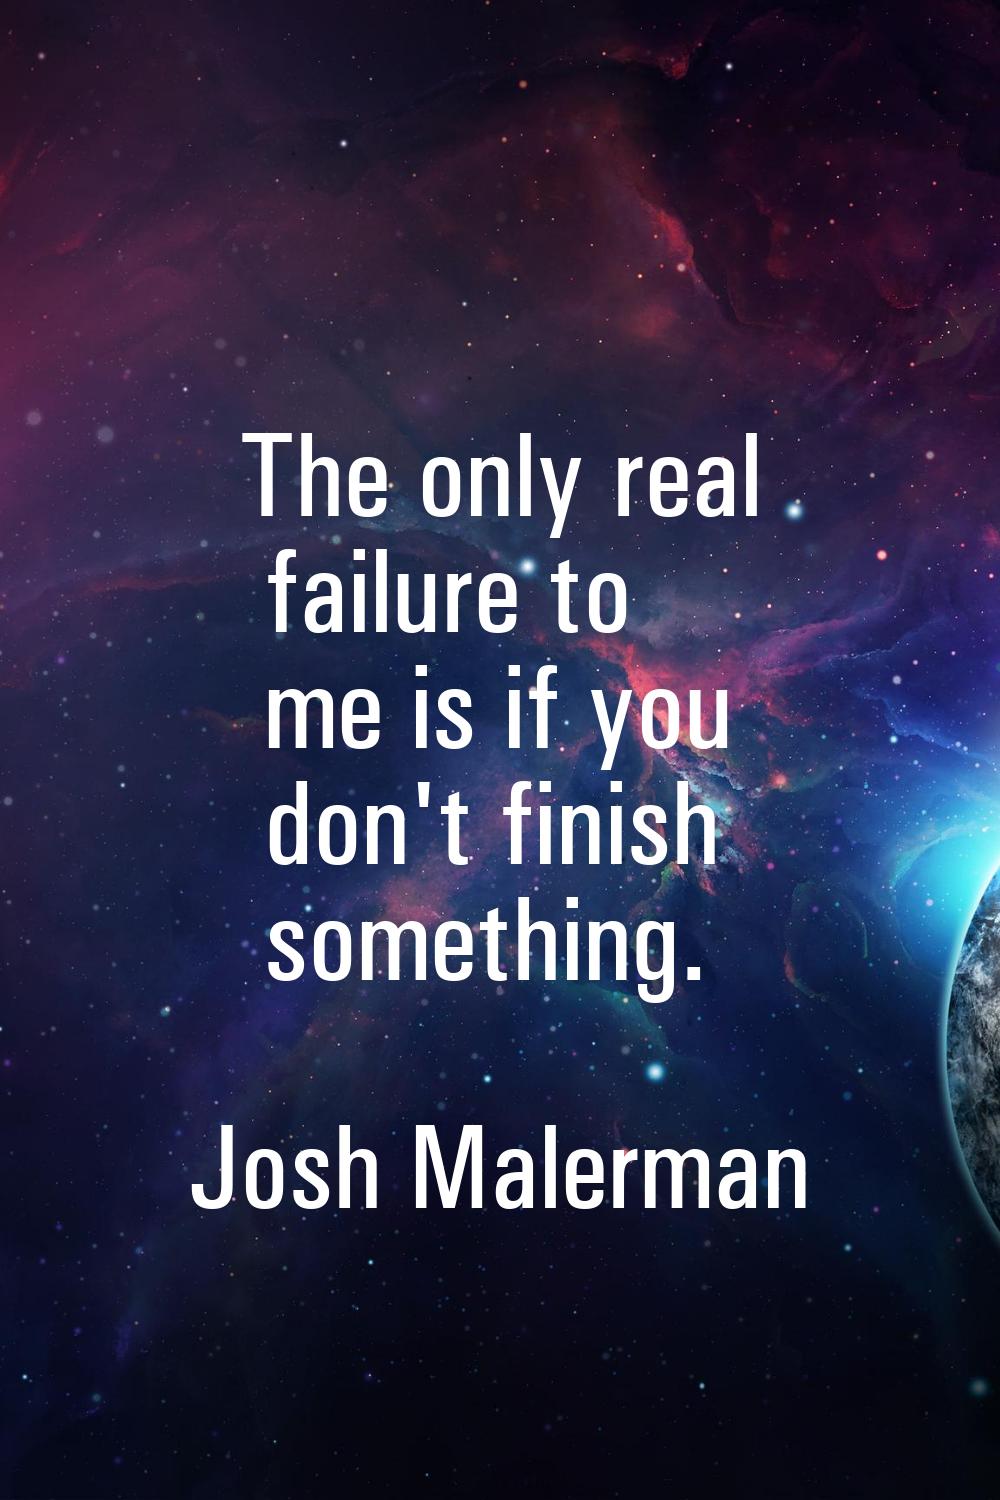 The only real failure to me is if you don't finish something.